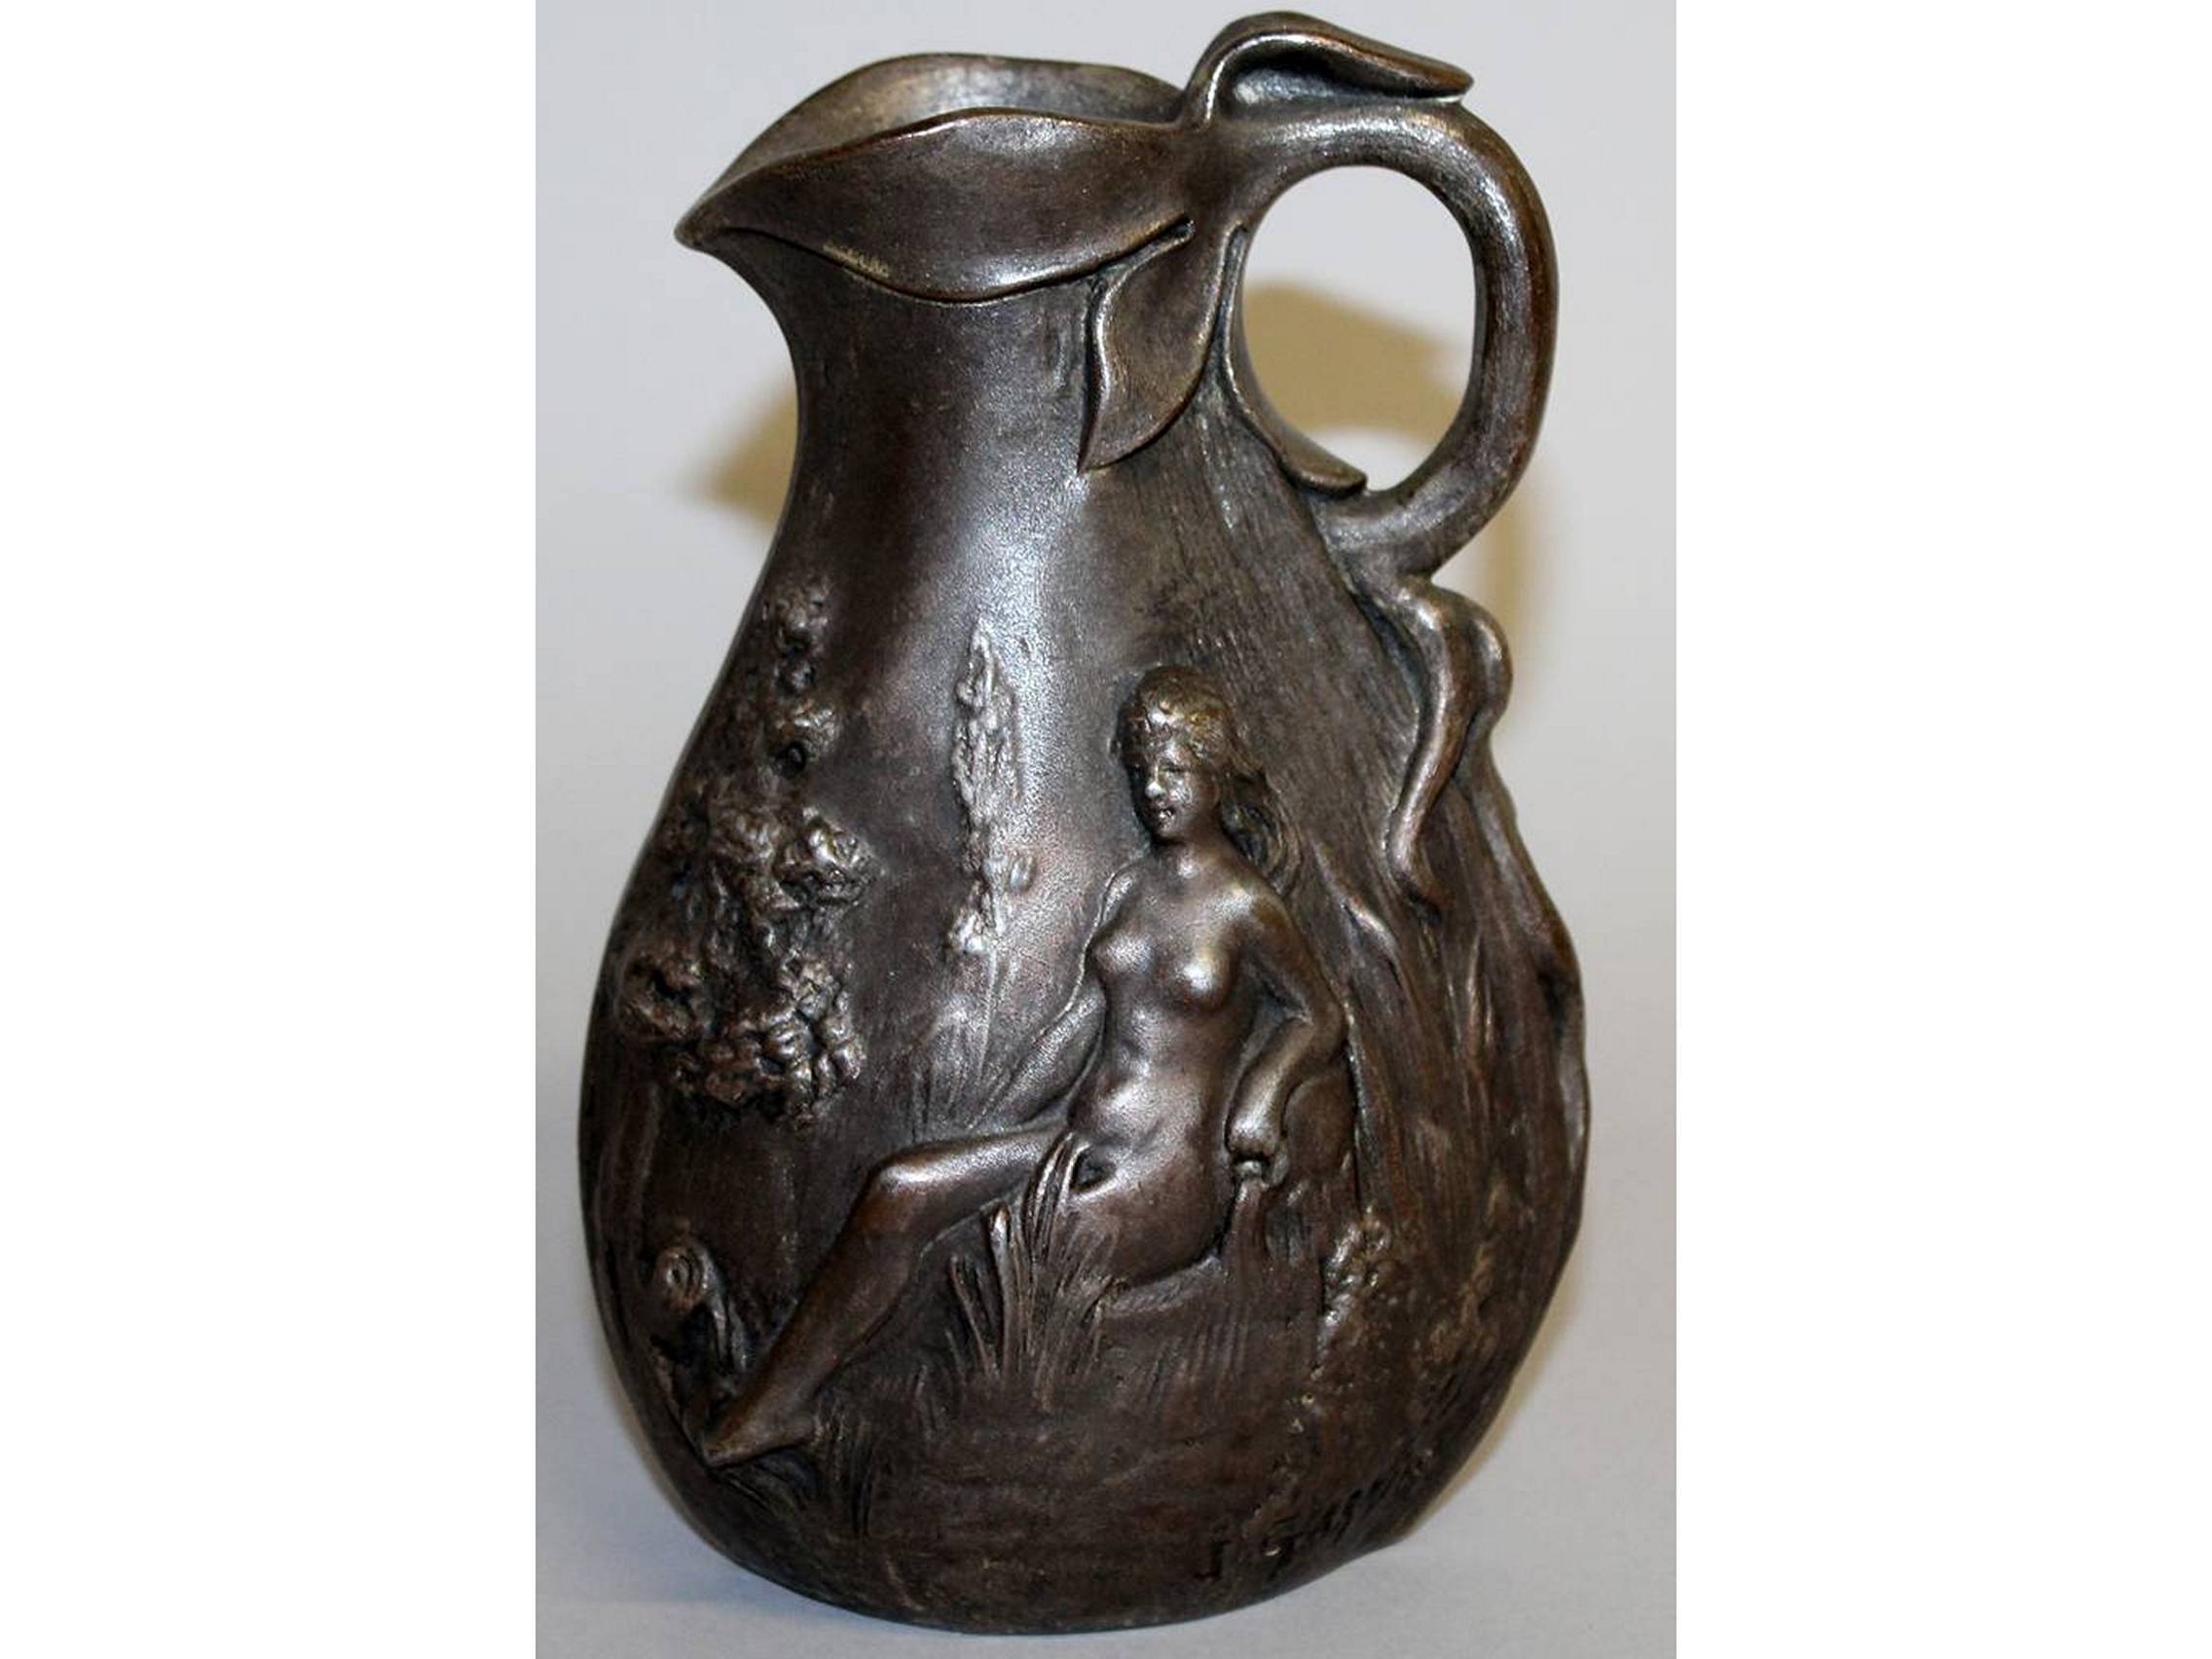 J. GARNIER. AN ART NOUVEAU METAL JUG, repousse with two nude seated female figures. Signed. 6.5ins